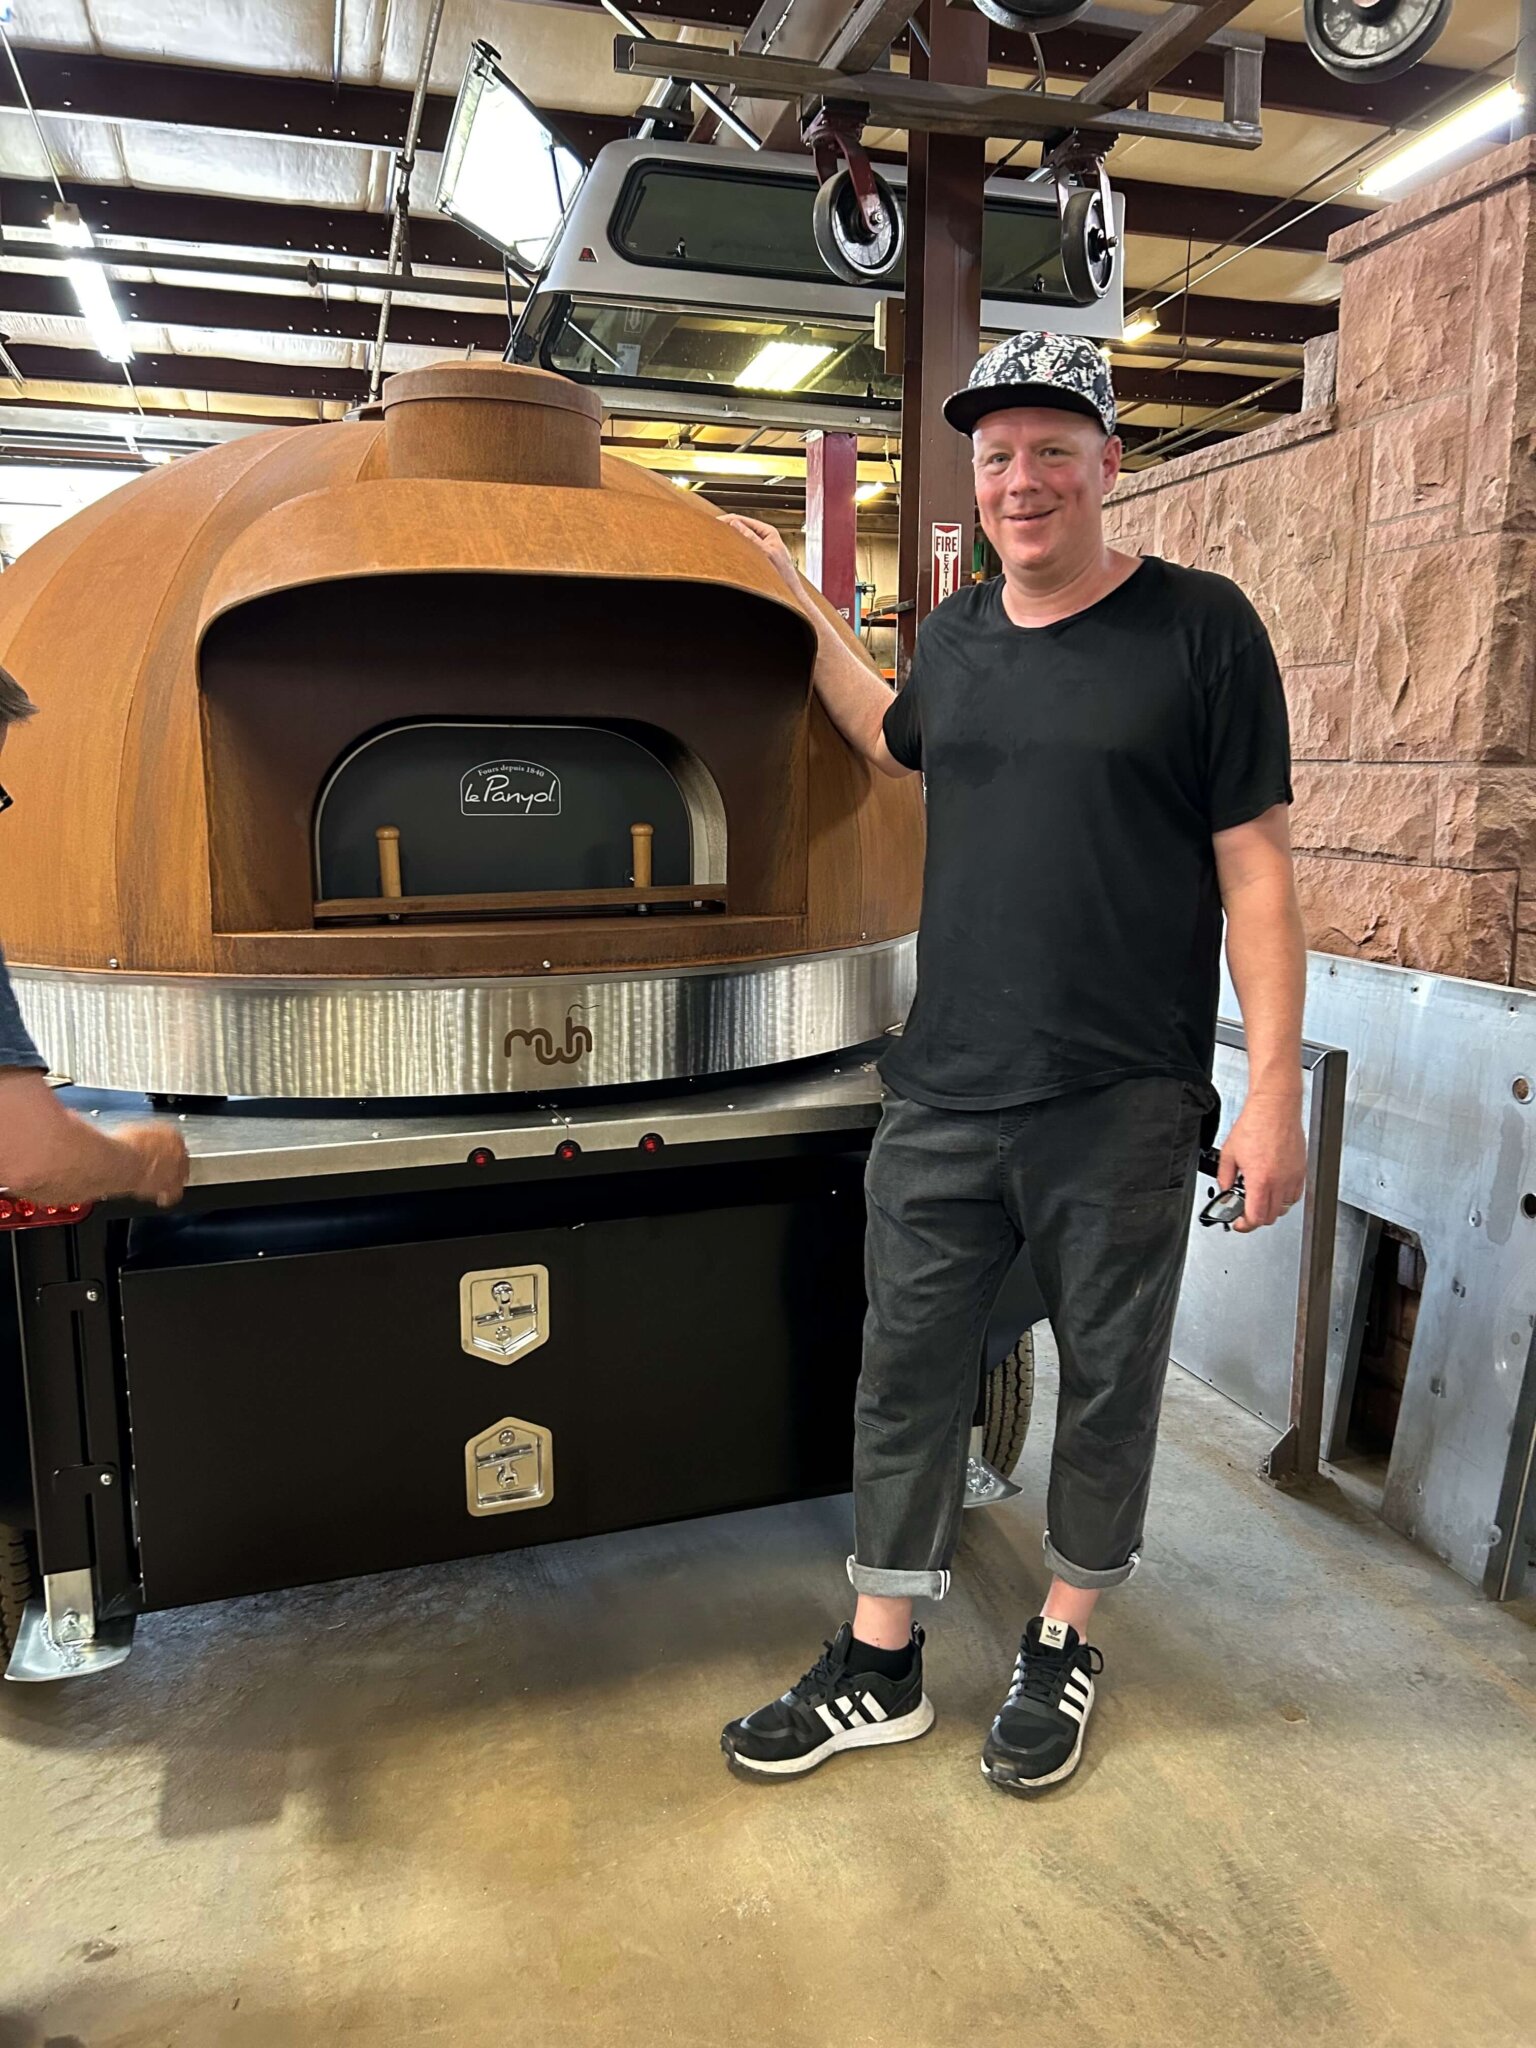 Smillie Pizza owner Justin Smillie and his wood-fired oven